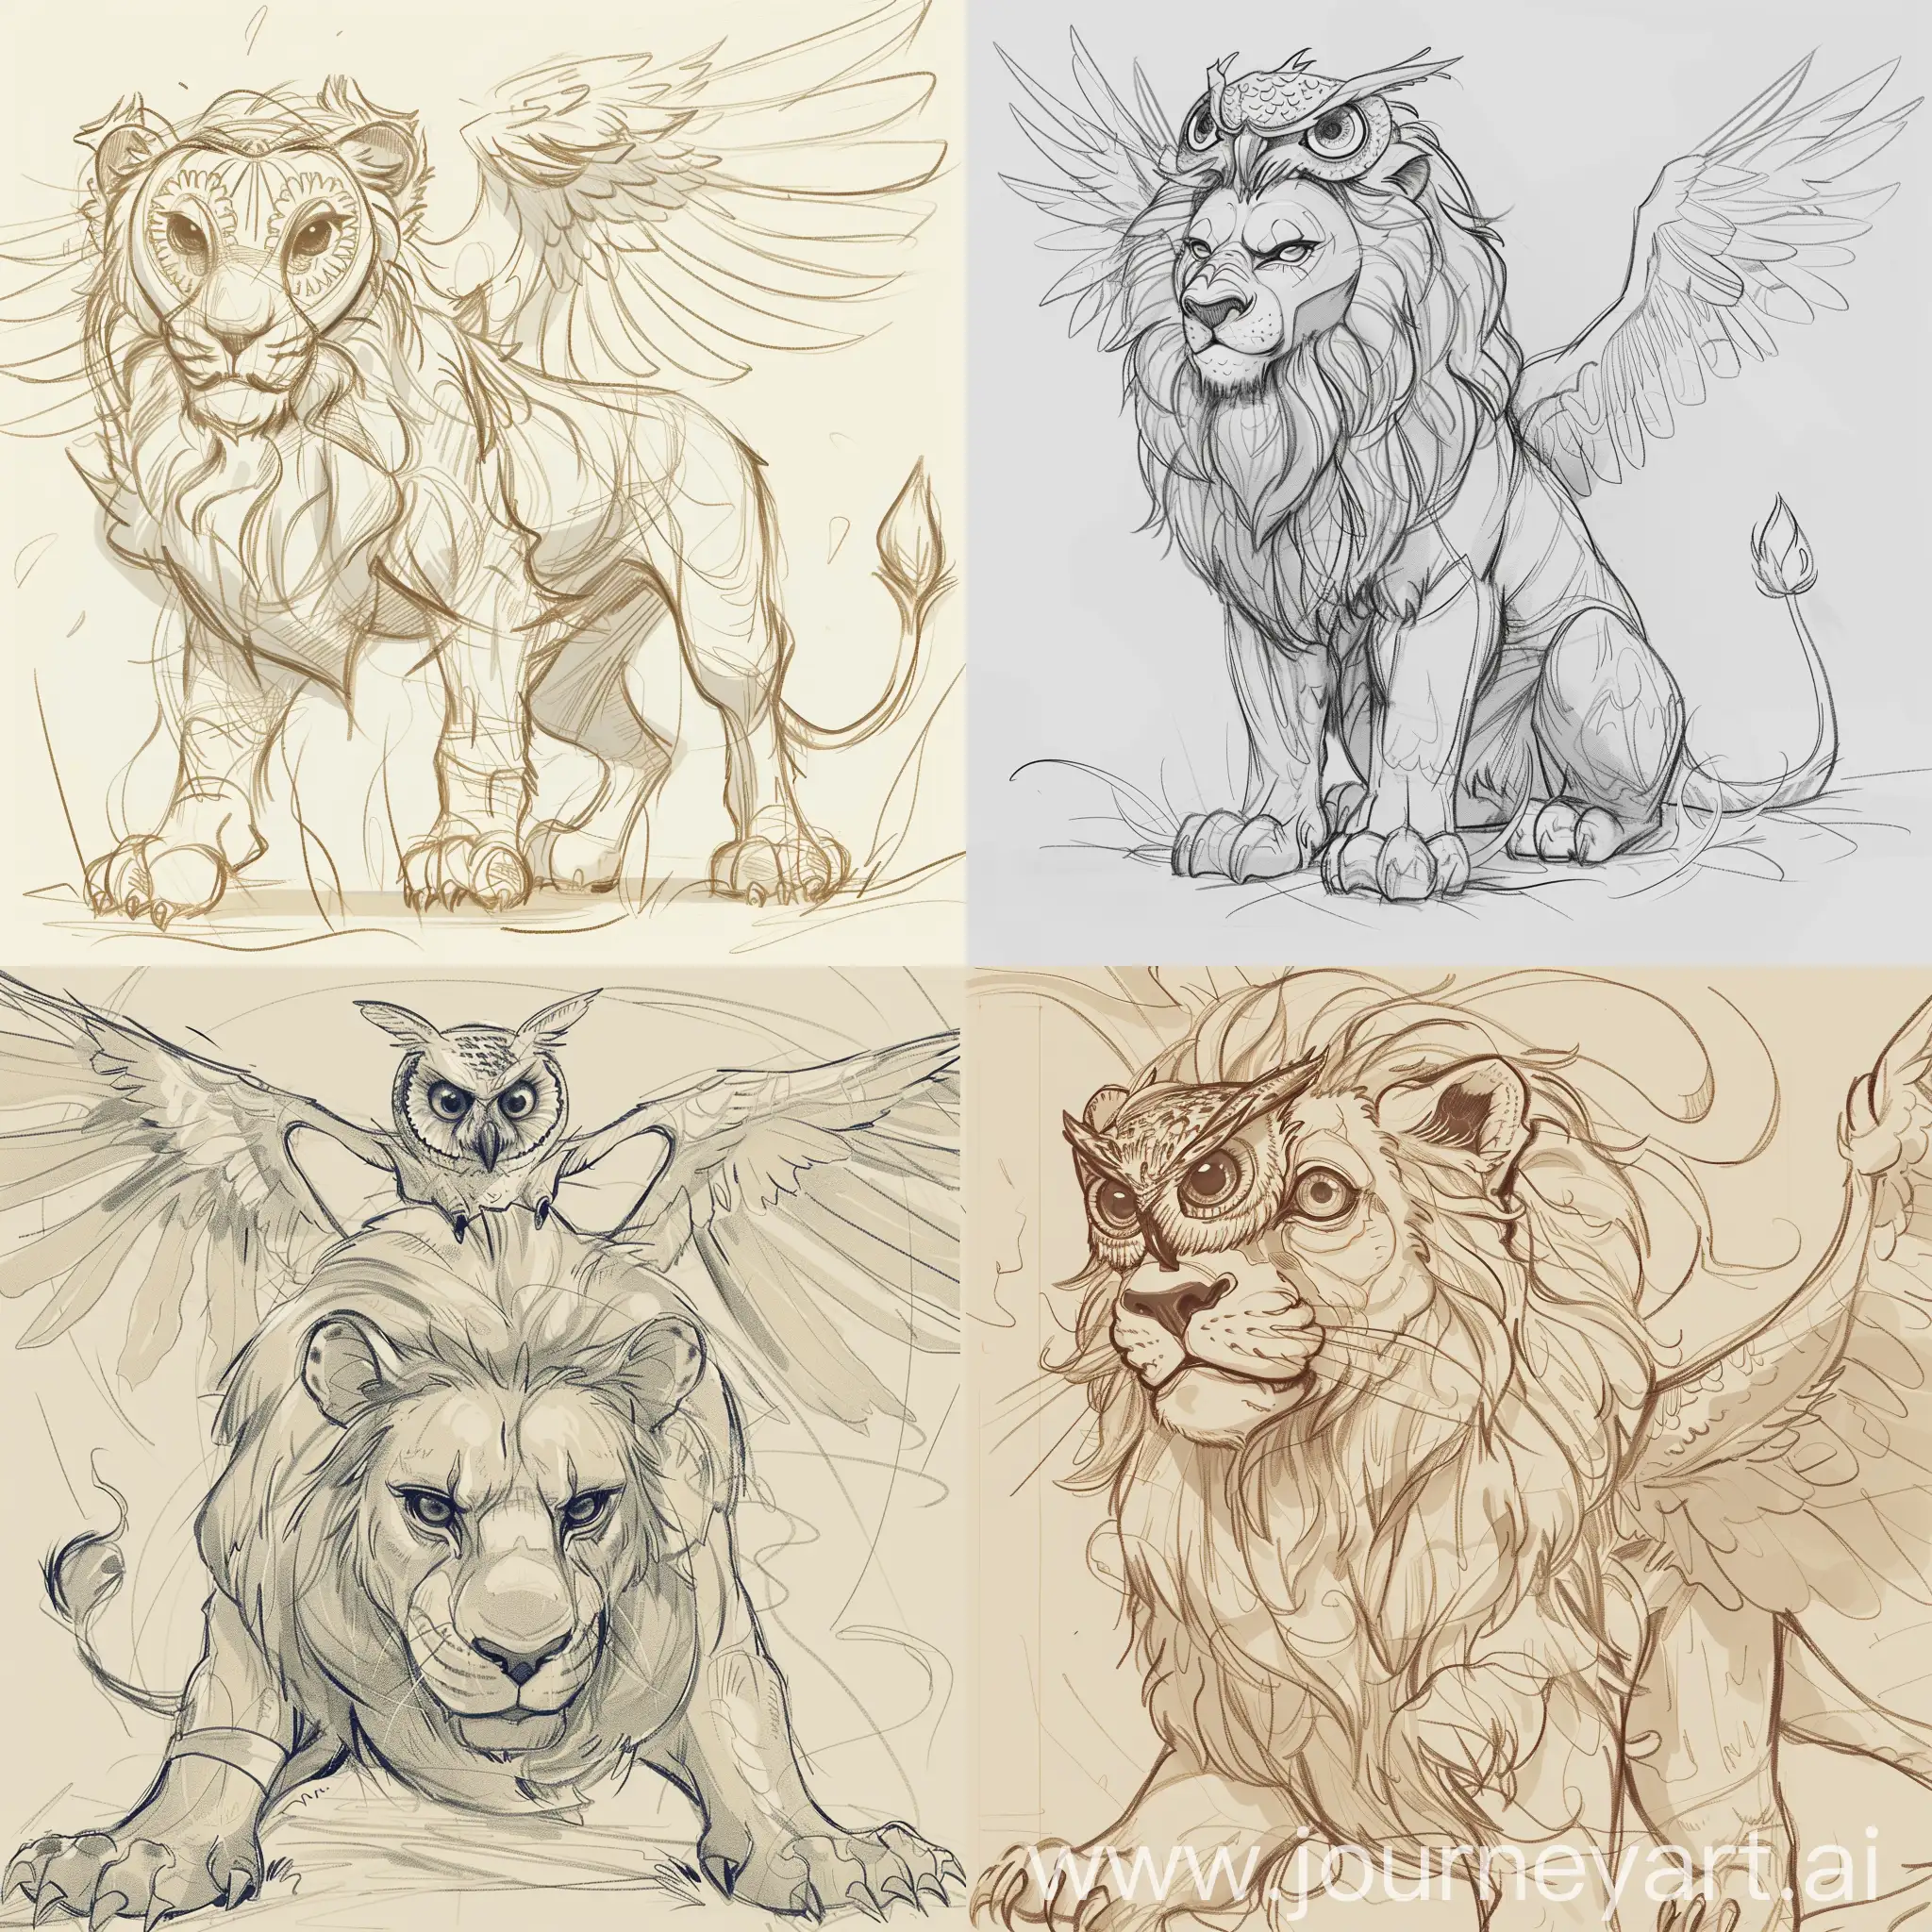 Hybrid-Creature-Majestic-Lion-with-Owl-Features